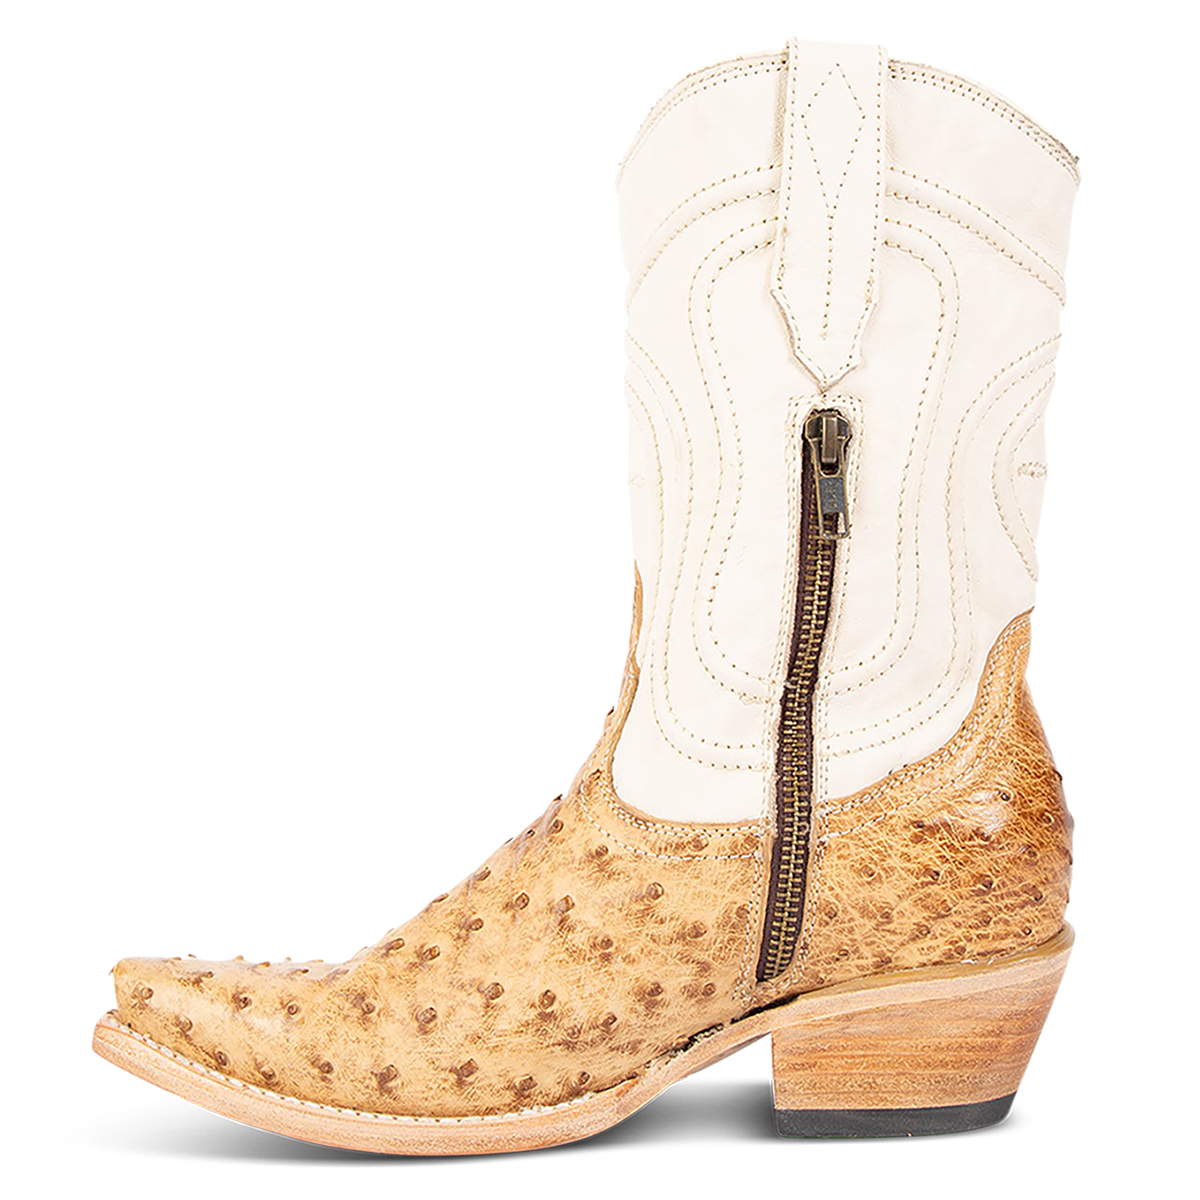 Inside view showing zip closure on FREEBIRD women's Weston tan ostrich multi exotic leather mid calf cowgirl mid calf boot